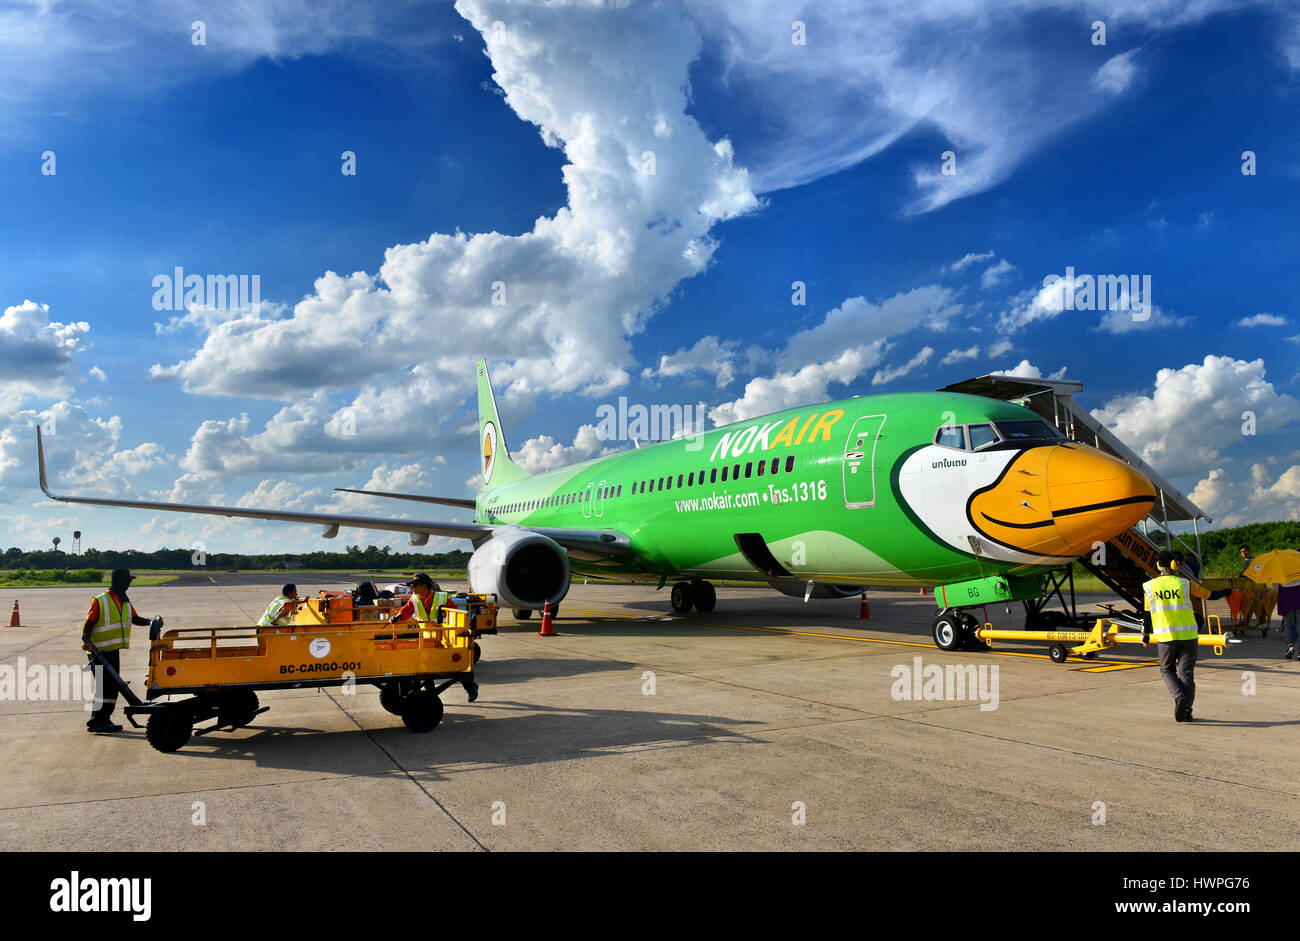 Udon Thani,Thailand August 22, 2015:Boeing 737-8FH from Nok air airline ,parking at the Udon Thani airport and unidentified men are working with the p Stock Photo